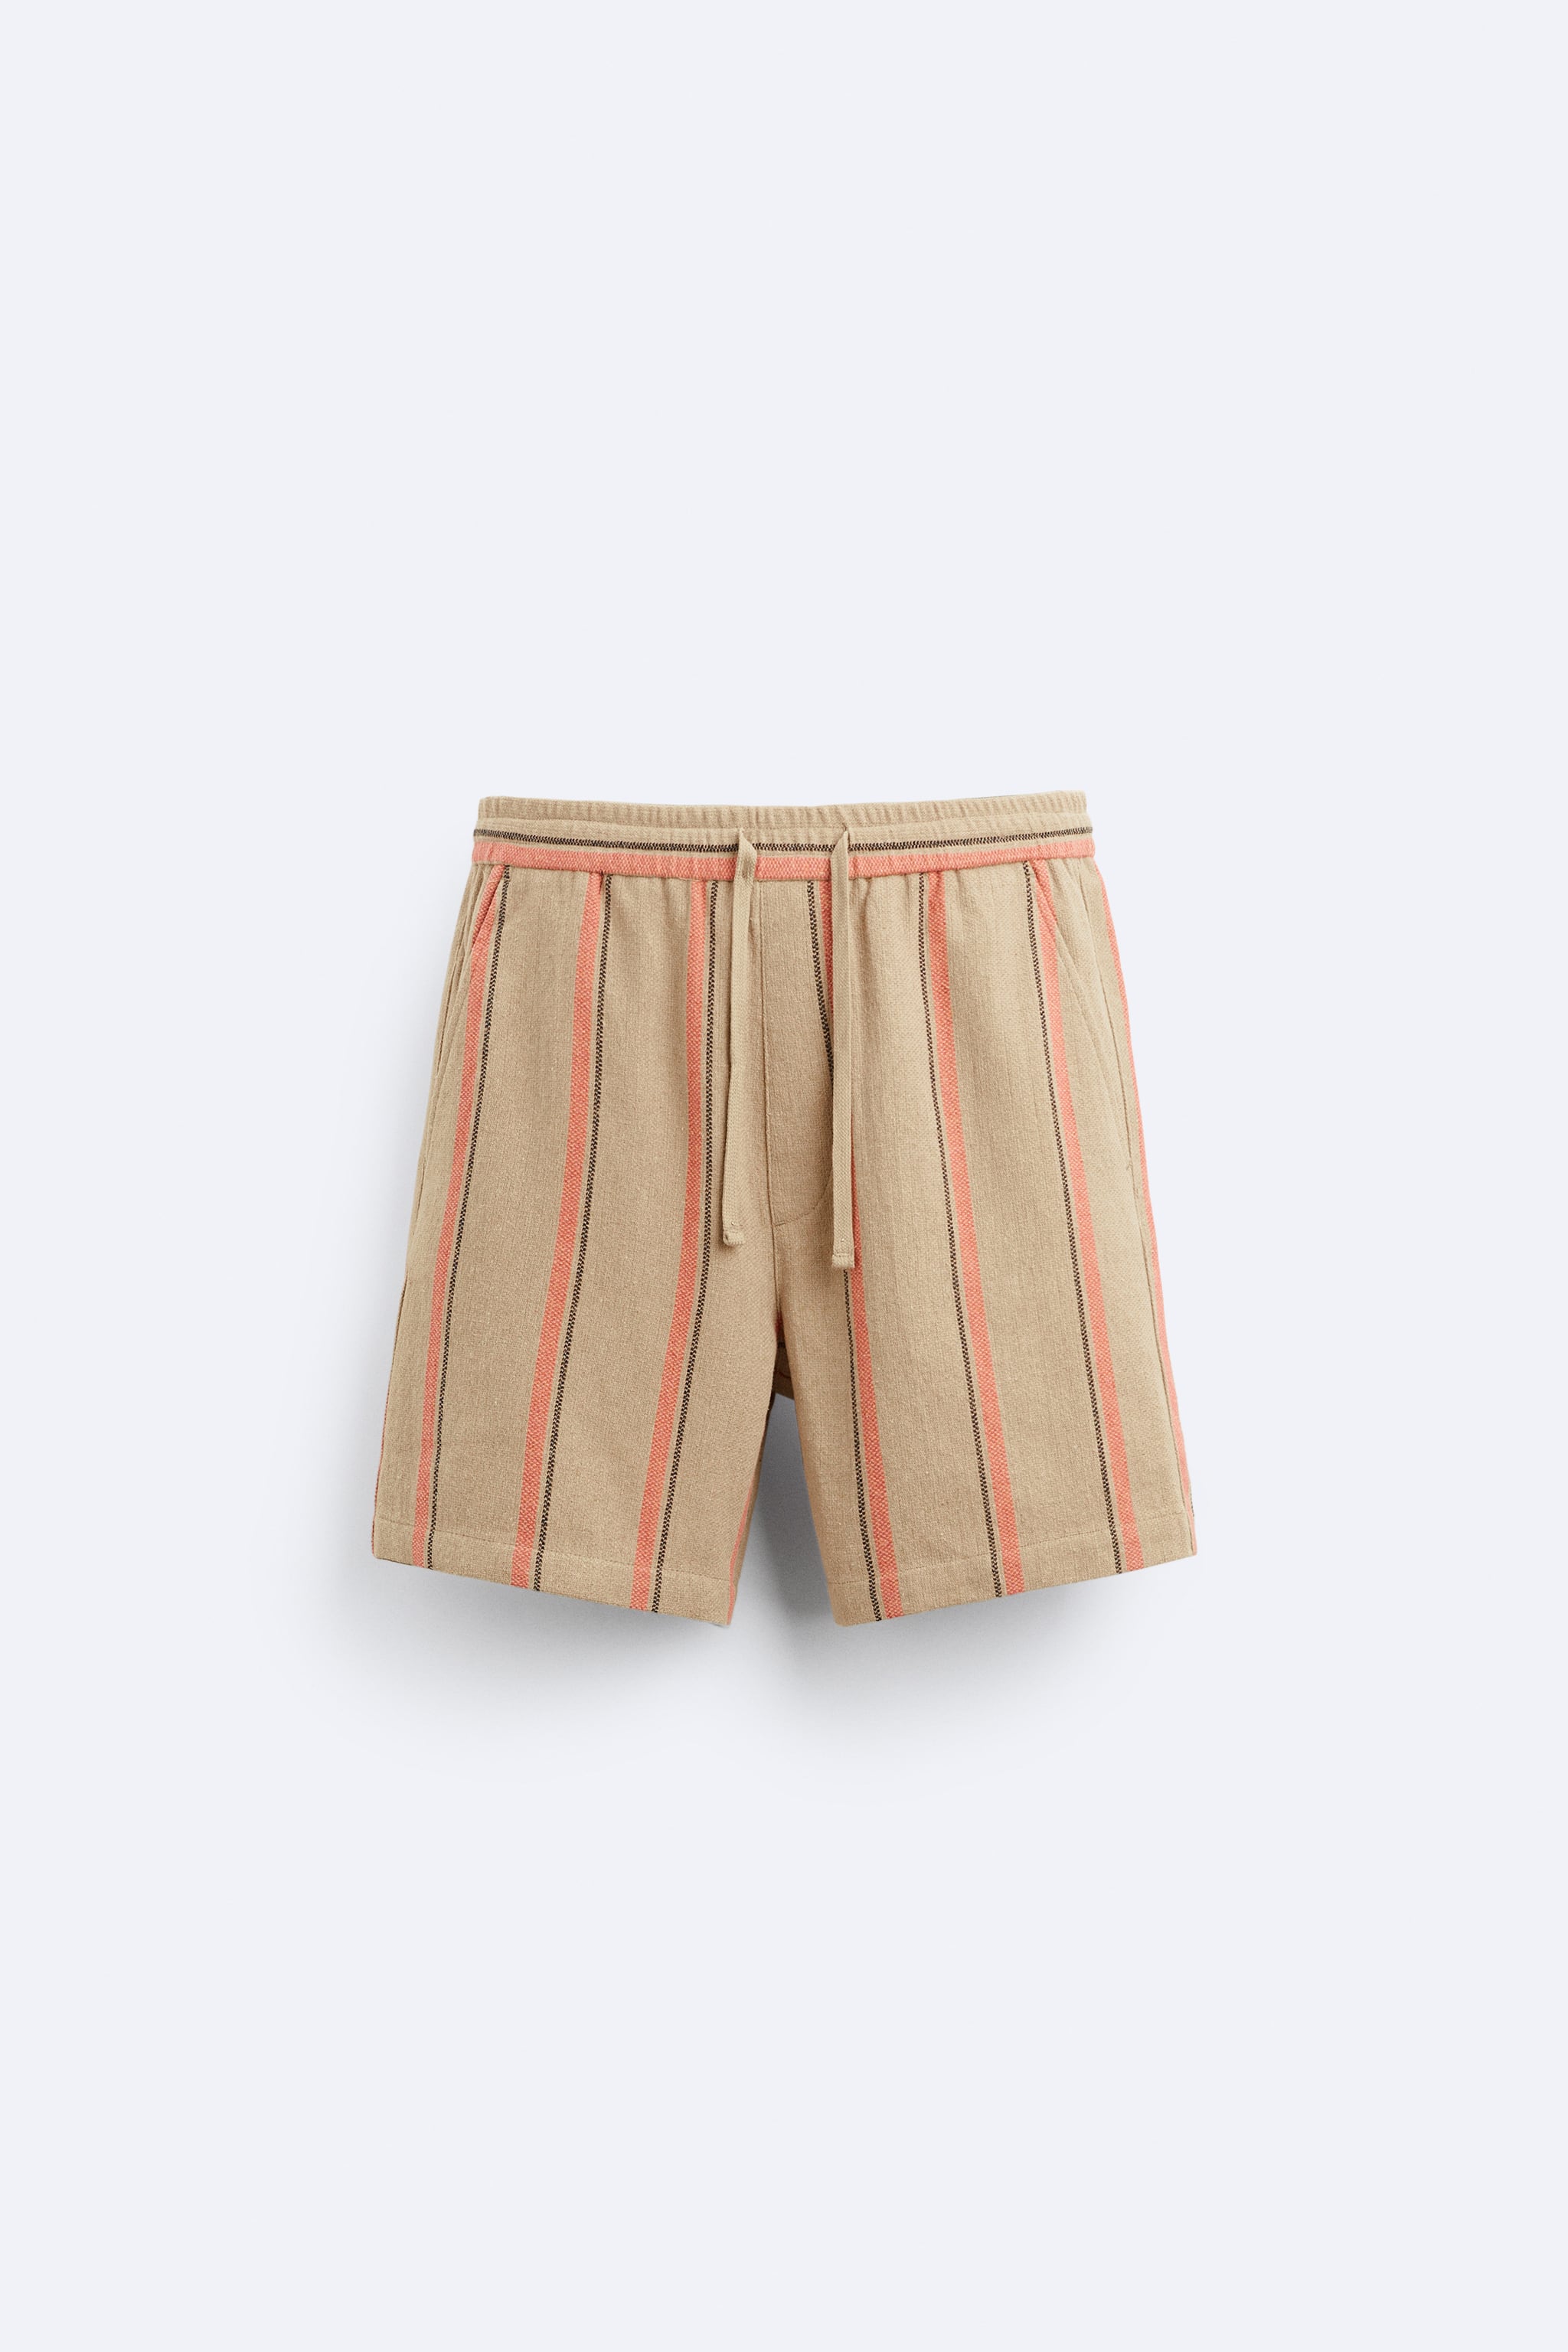 TEXTURED STRIPED SHORTS